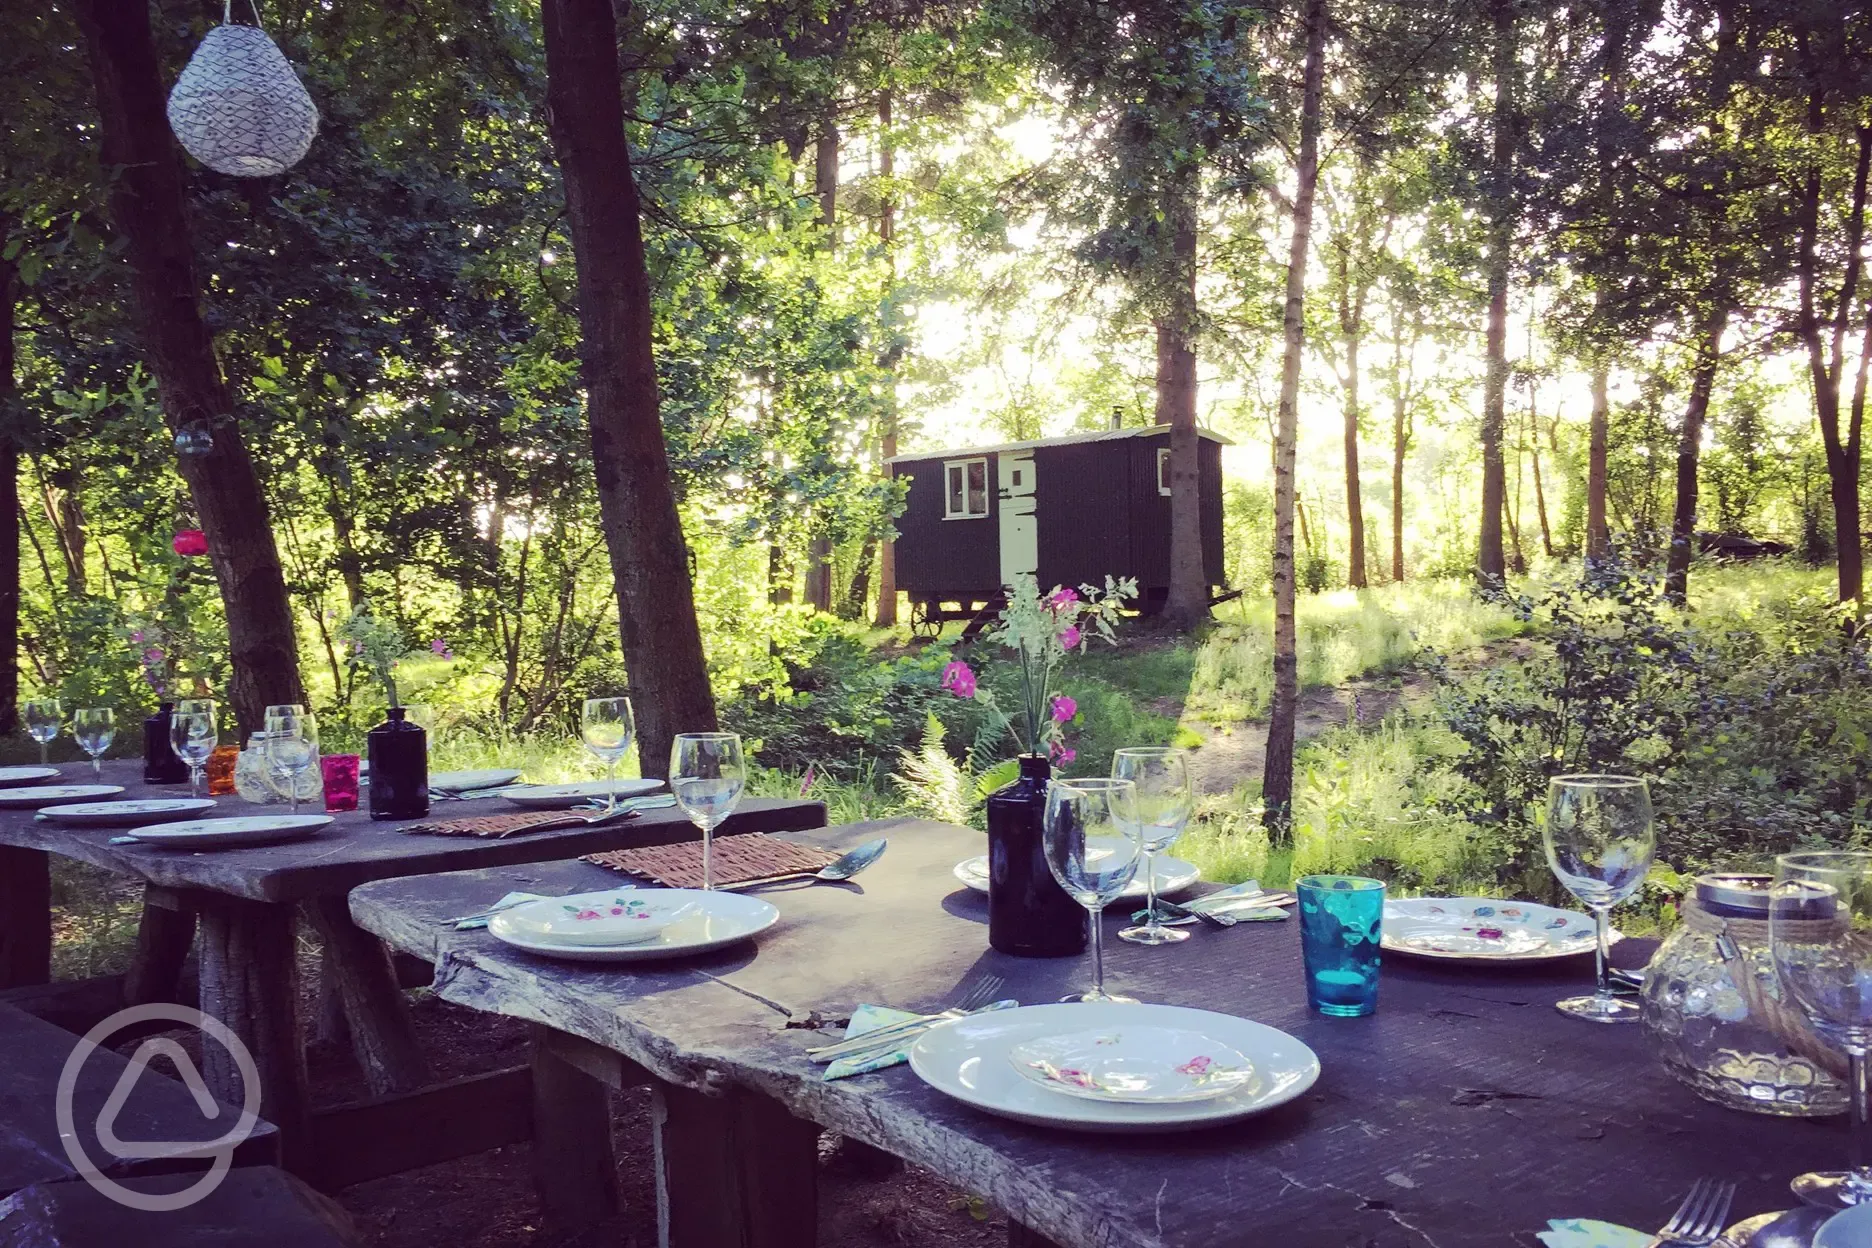 Dining alfresco on our rustic tables and benches.